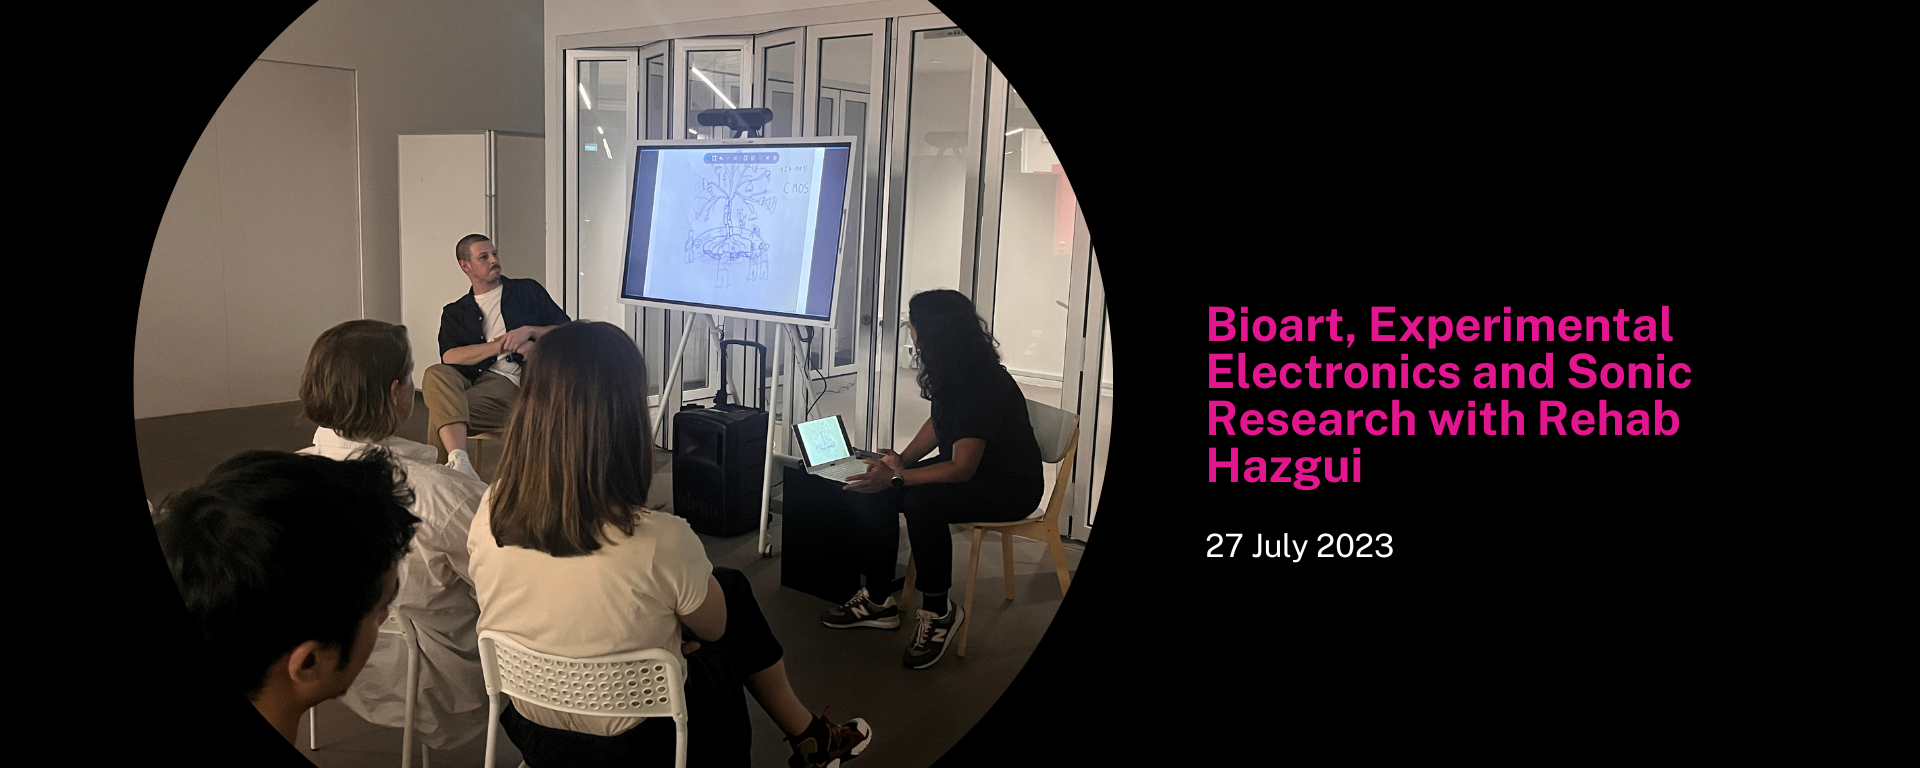 Bioart, Experimental Electronics and Sonic Research with Rehab Hazgui